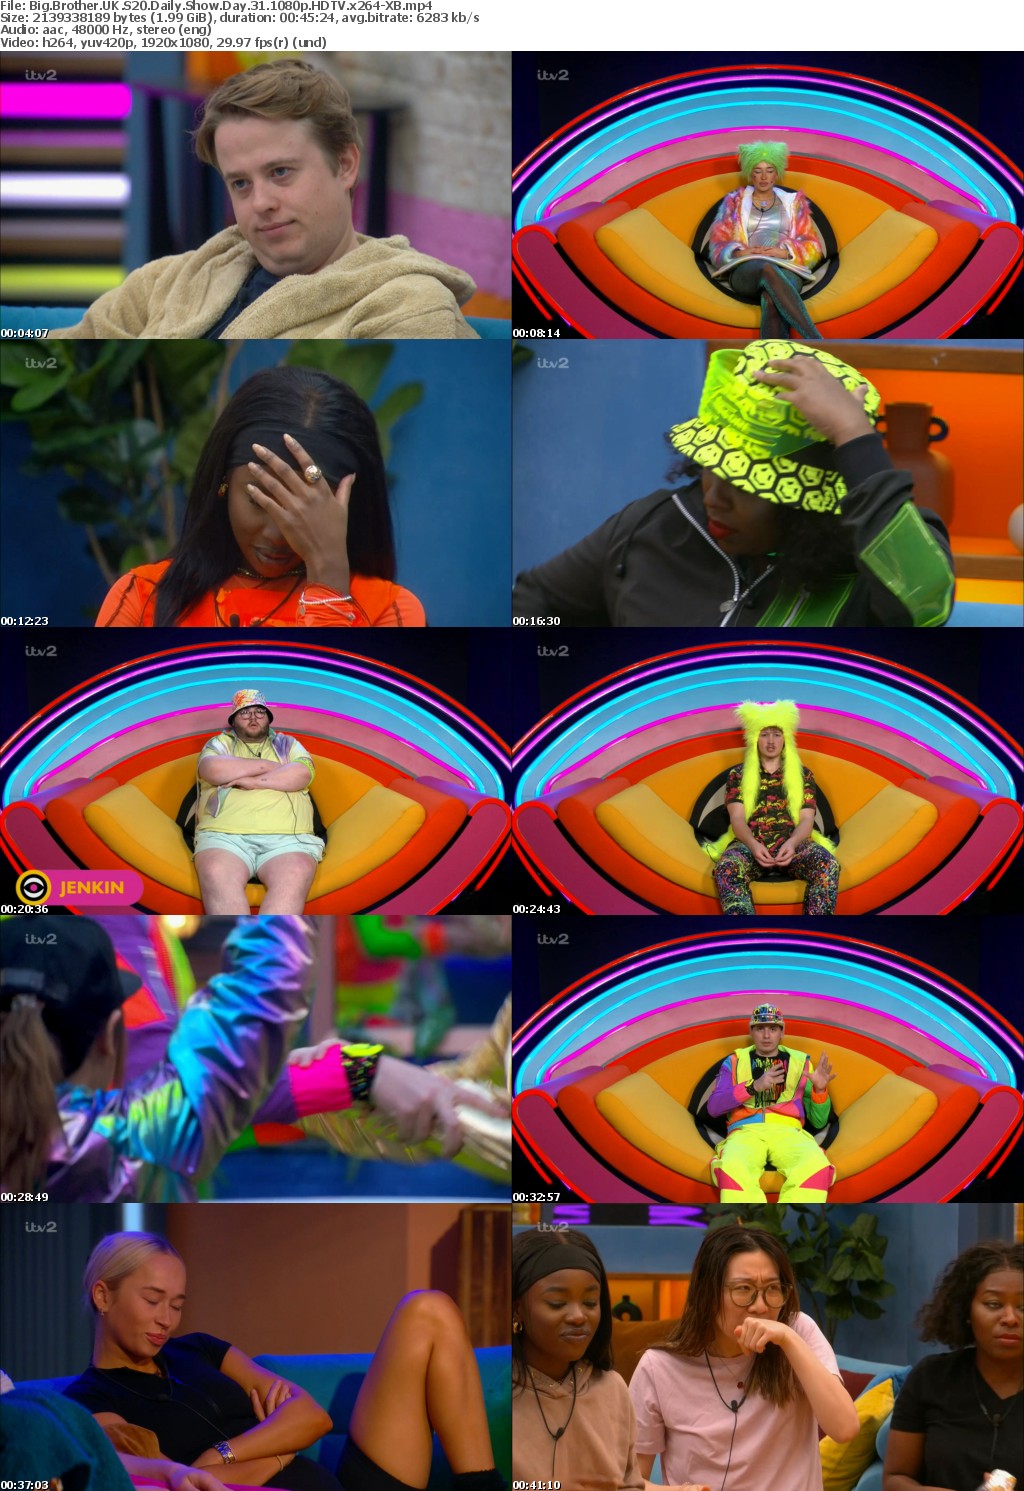 Big Brother UK S20 Daily Show Day 31 1080p HDTV x264-XB